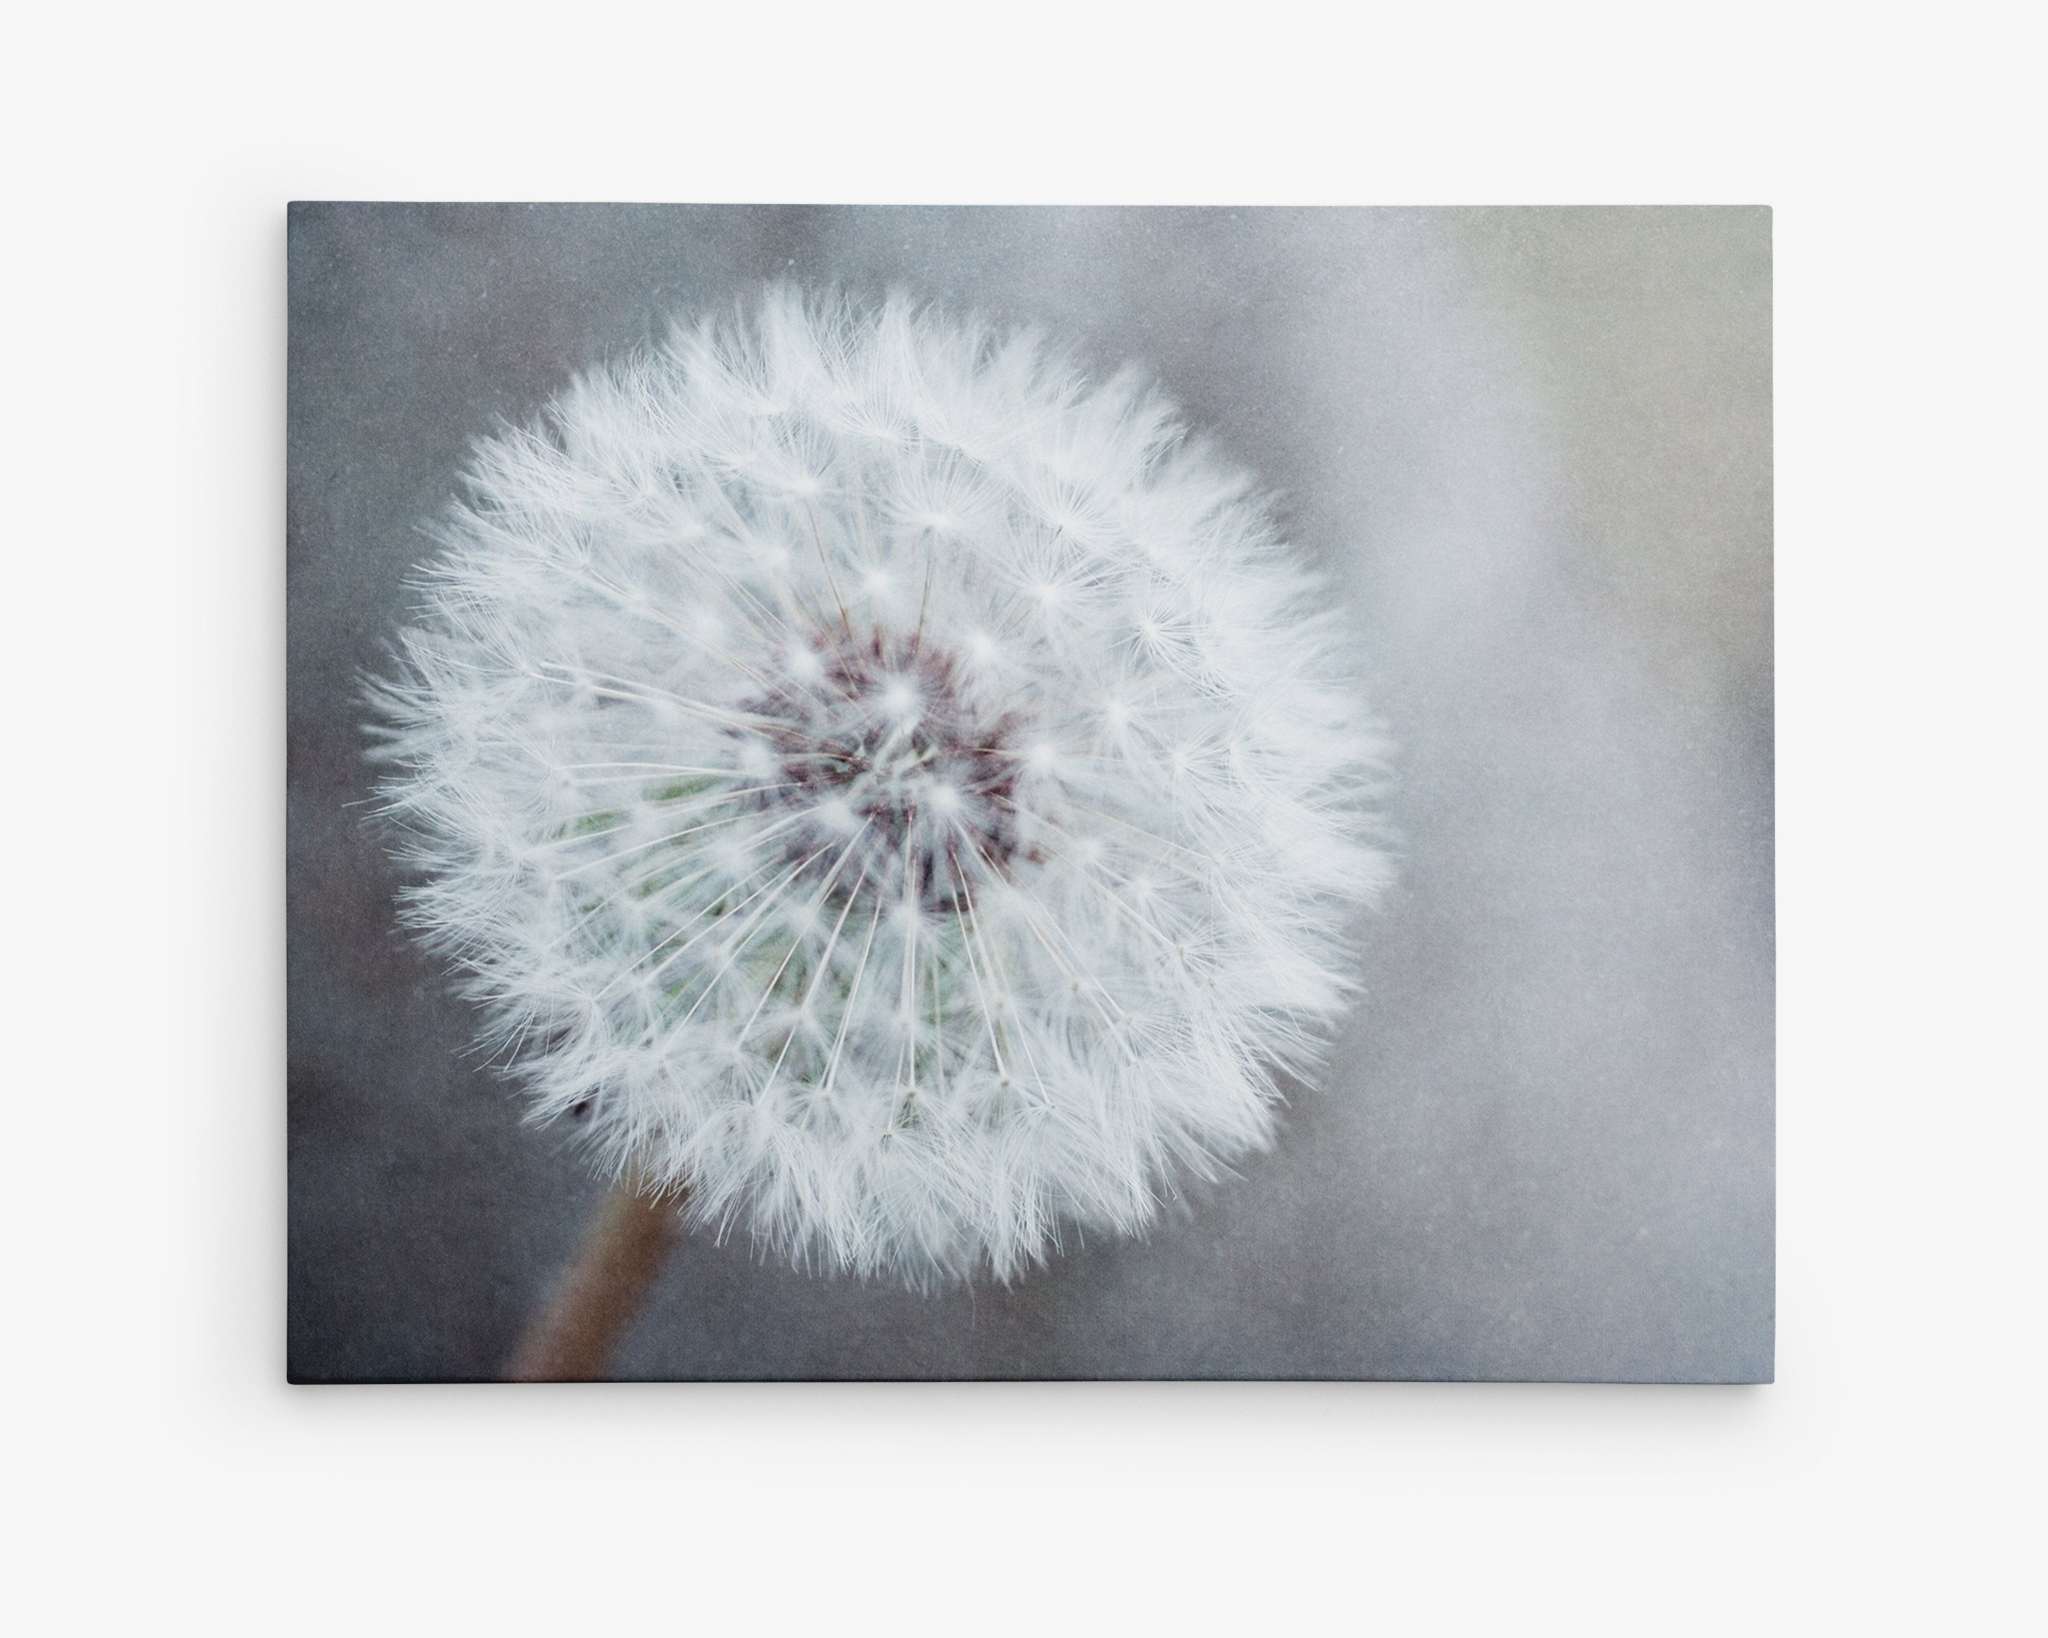 Close-up of a white dandelion seed head against a soft, blurred gray background. The intricate details of the dandelion seeds are clearly visible, with delicate filaments radiating from the central stem. This serene and minimalist image is available as Neutral Grey Floral Canvas Wall Art, 'Dandelion King' by Offley Green for a ready-to-hang solution.